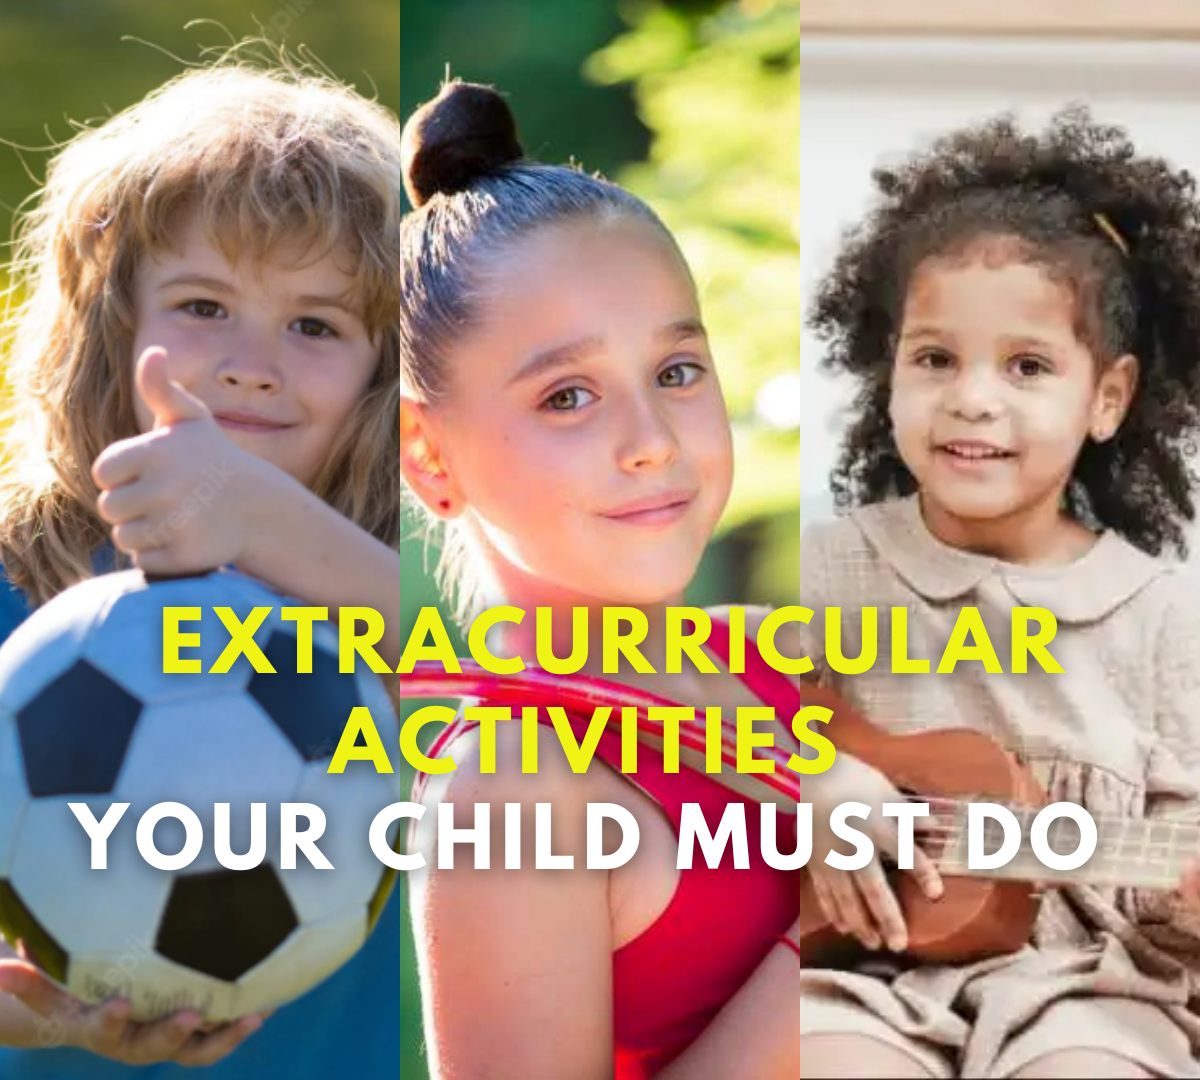 How To Make Your Child Get Involved in Extracurricular Activities (2)